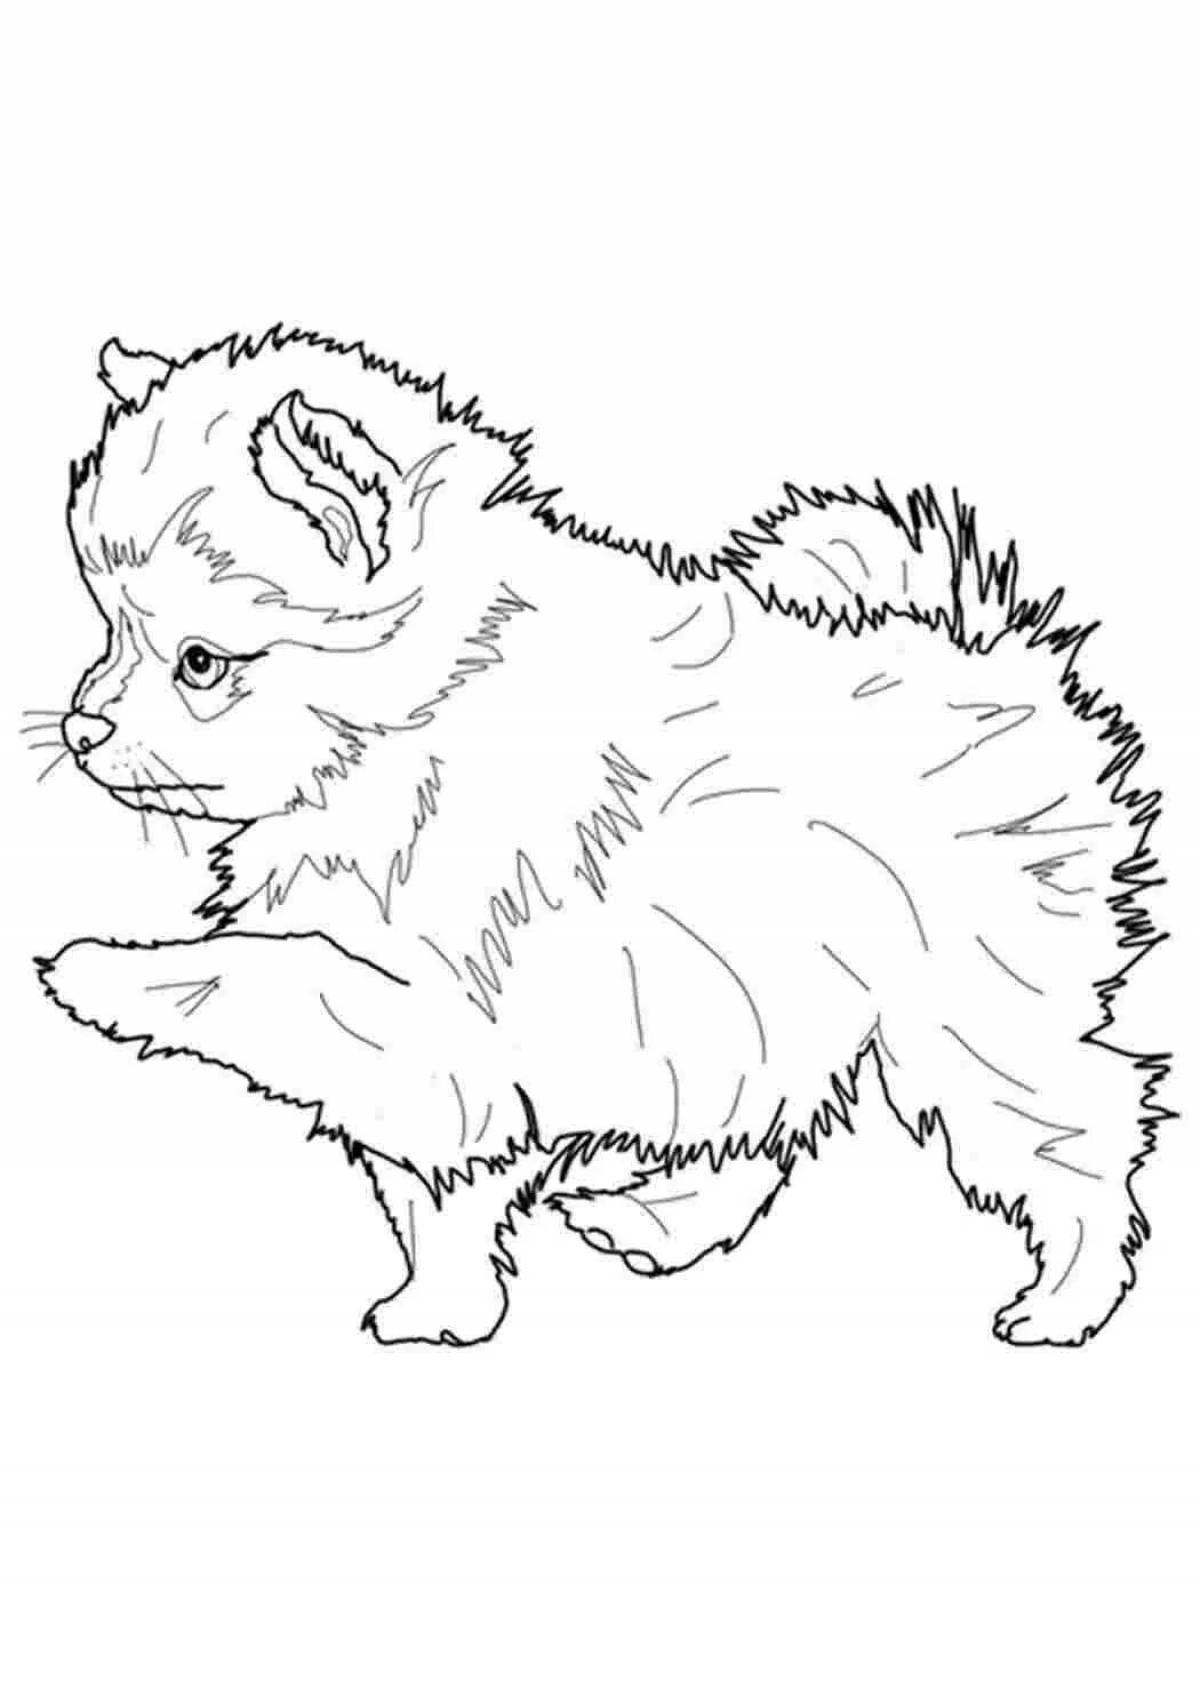 Colorful spitz drawing